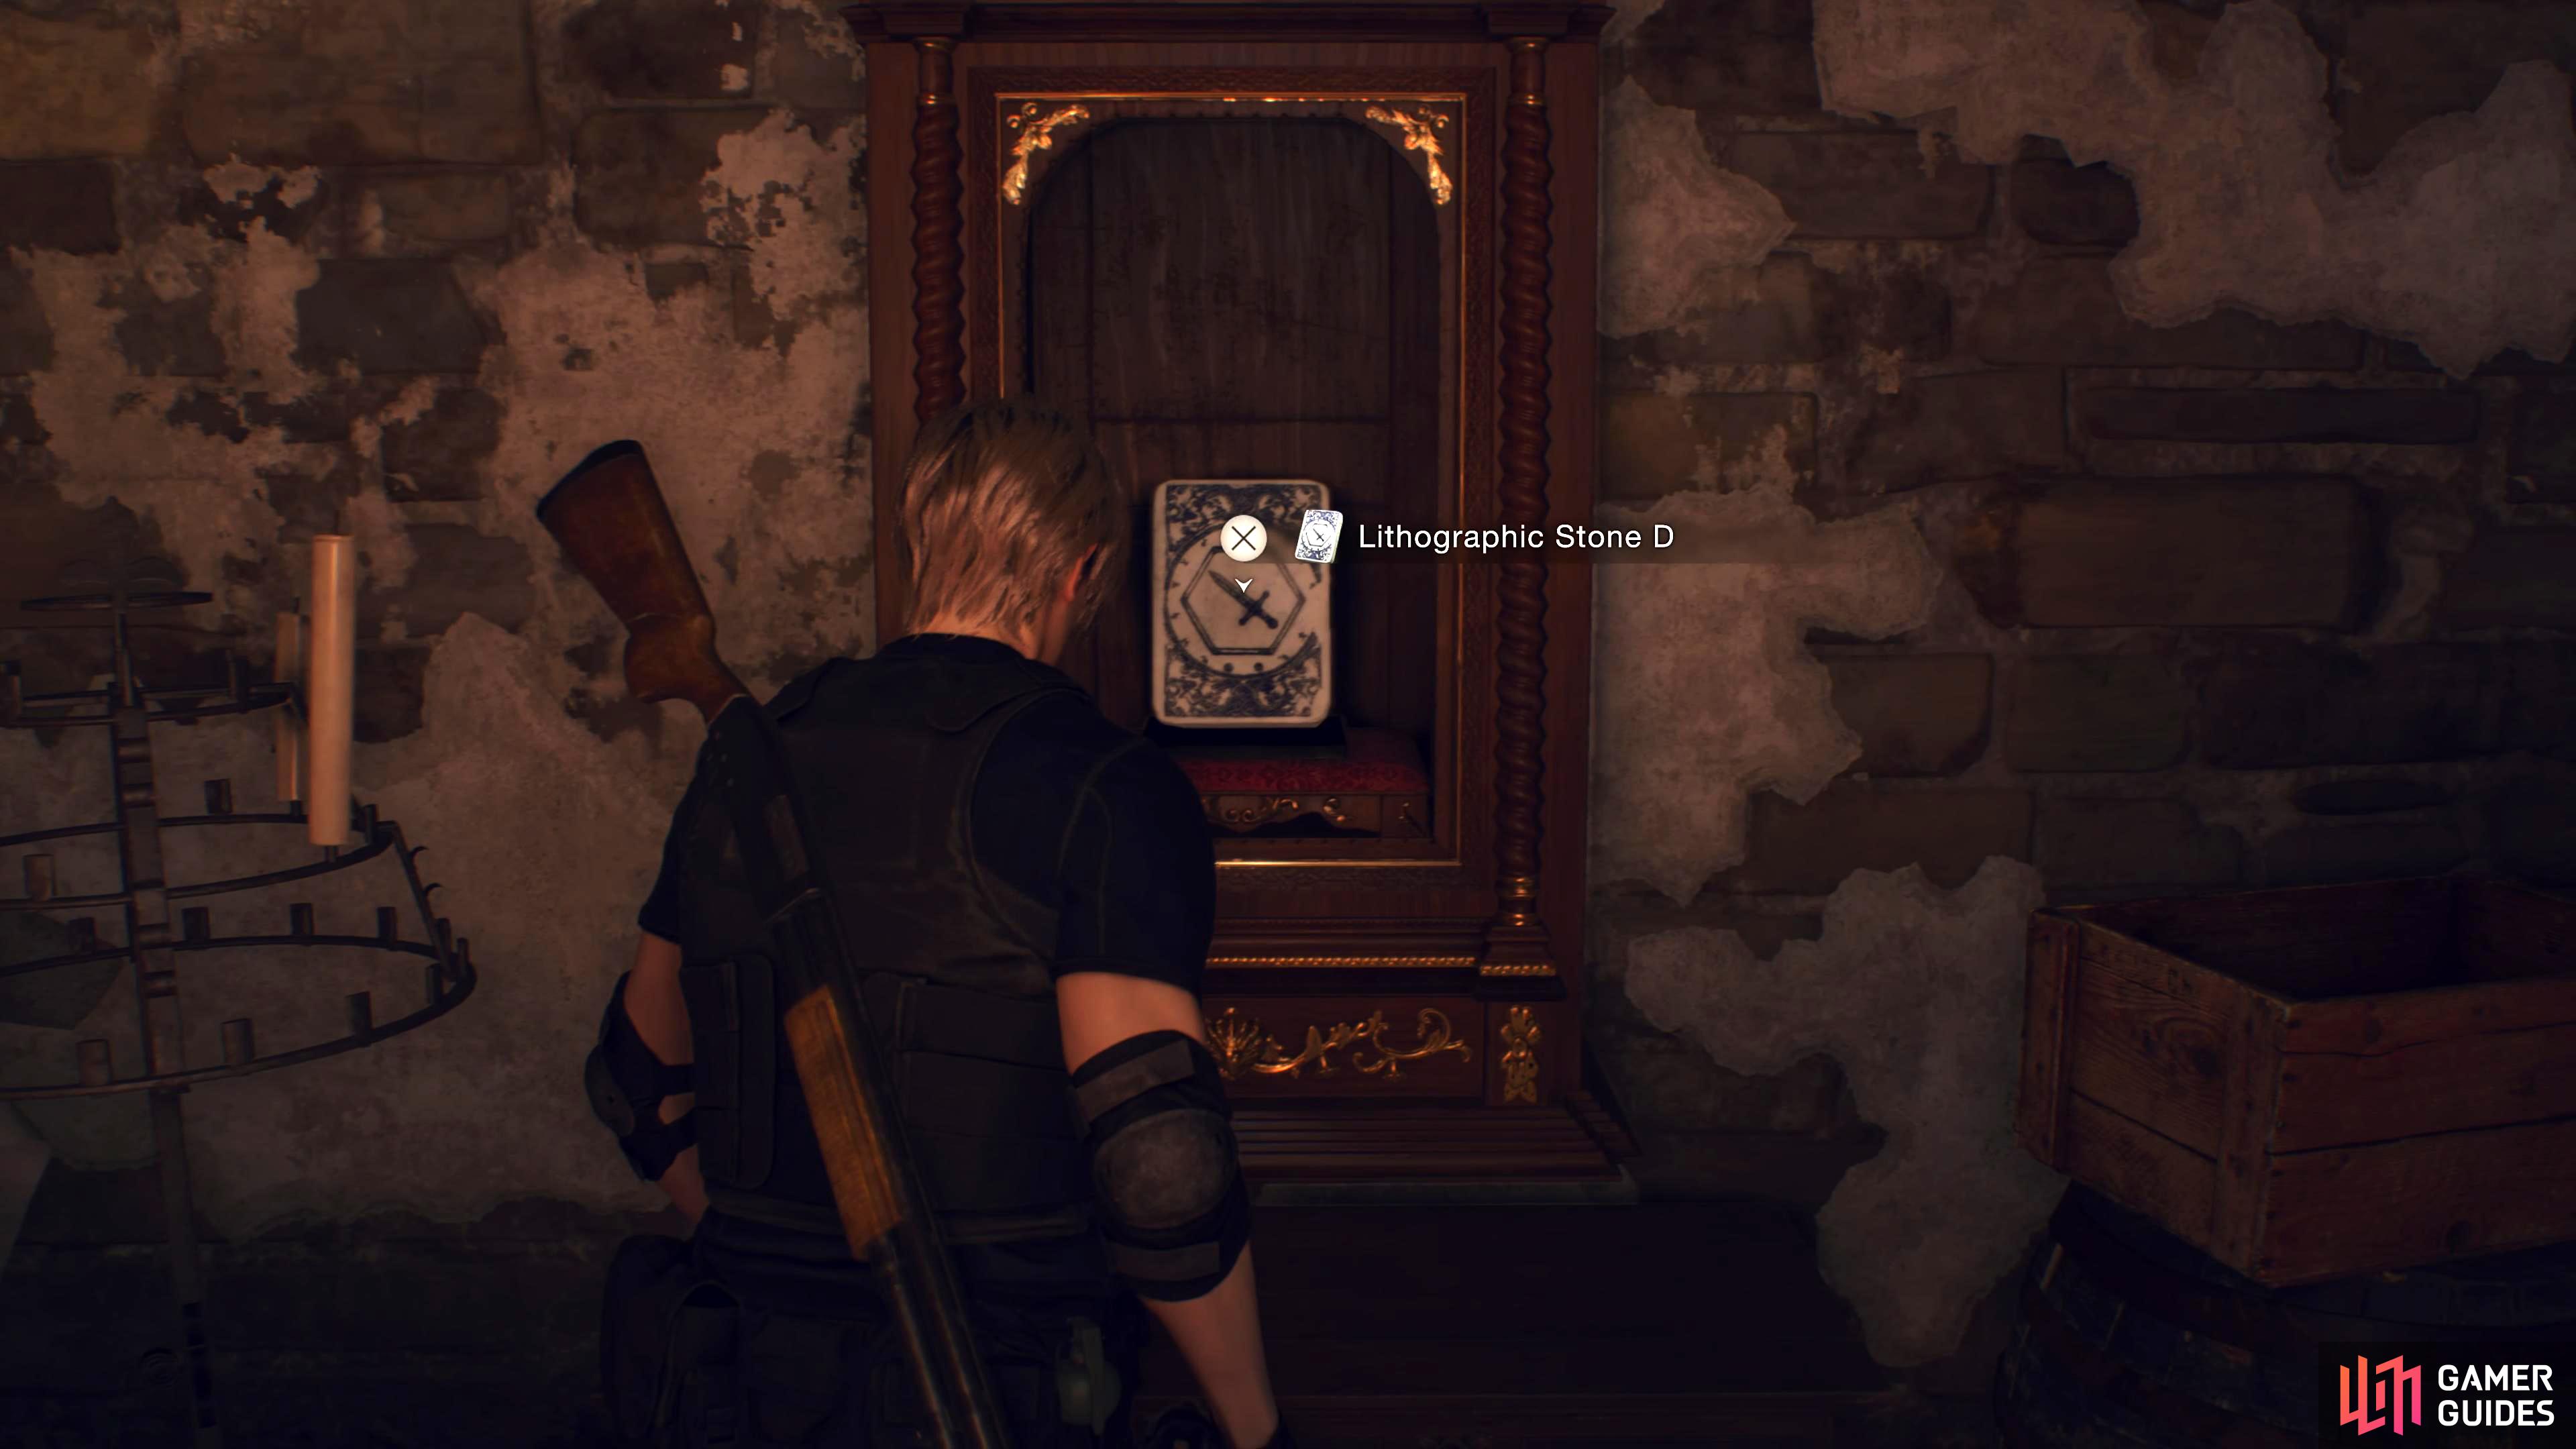 Resident Evil 4 Remake: Bindery Lithographic Stones Puzzle Solution